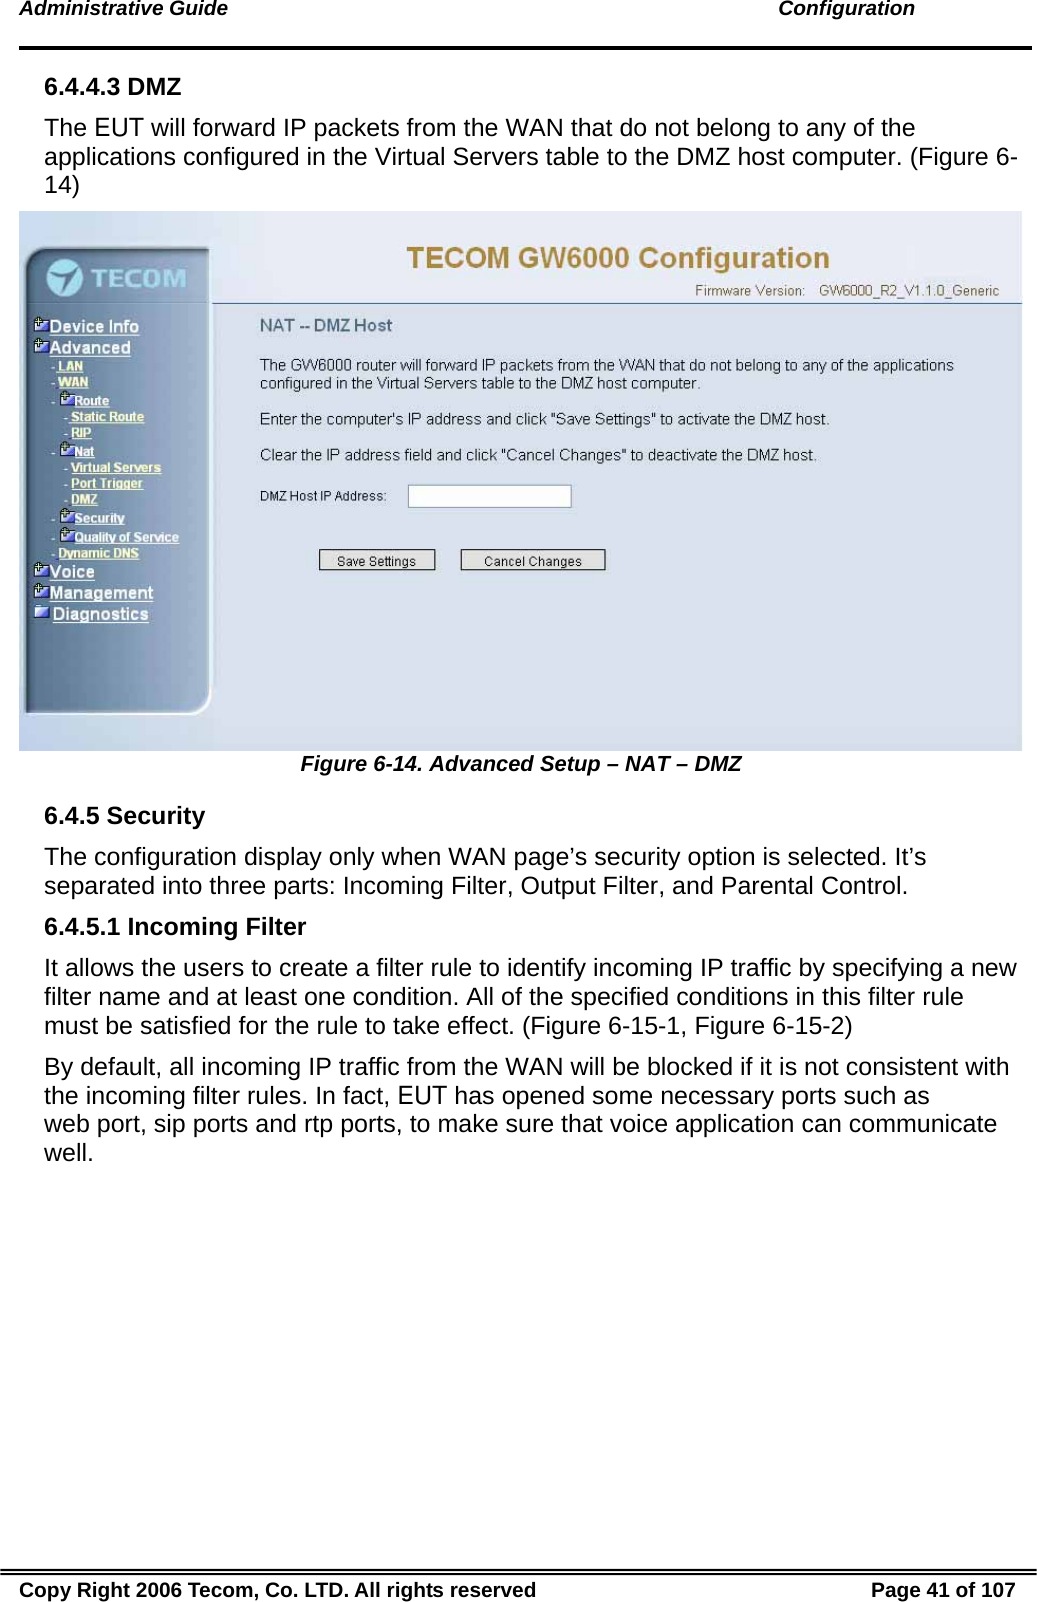 Administrative Guide                                                                                               Configuration 6.4.4.3 DMZ The EUT will forward IP packets from the WAN that do not belong to any of the applications configured in the Virtual Servers table to the DMZ host computer. (Figure 6-14)  Figure 6-14. Advanced Setup – NAT – DMZ 6.4.5 Security The configuration display only when WAN page’s security option is selected. It’s separated into three parts: Incoming Filter, Output Filter, and Parental Control. 6.4.5.1 Incoming Filter It allows the users to create a filter rule to identify incoming IP traffic by specifying a new filter name and at least one condition. All of the specified conditions in this filter rule must be satisfied for the rule to take effect. (Figure 6-15-1, Figure 6-15-2)   By default, all incoming IP traffic from the WAN will be blocked if it is not consistent with the incoming filter rules. In fact, EUT has opened some necessary ports such as web port, sip ports and rtp ports, to make sure that voice application can communicate well. Copy Right 2006 Tecom, Co. LTD. All rights reserved  Page 41 of 107 